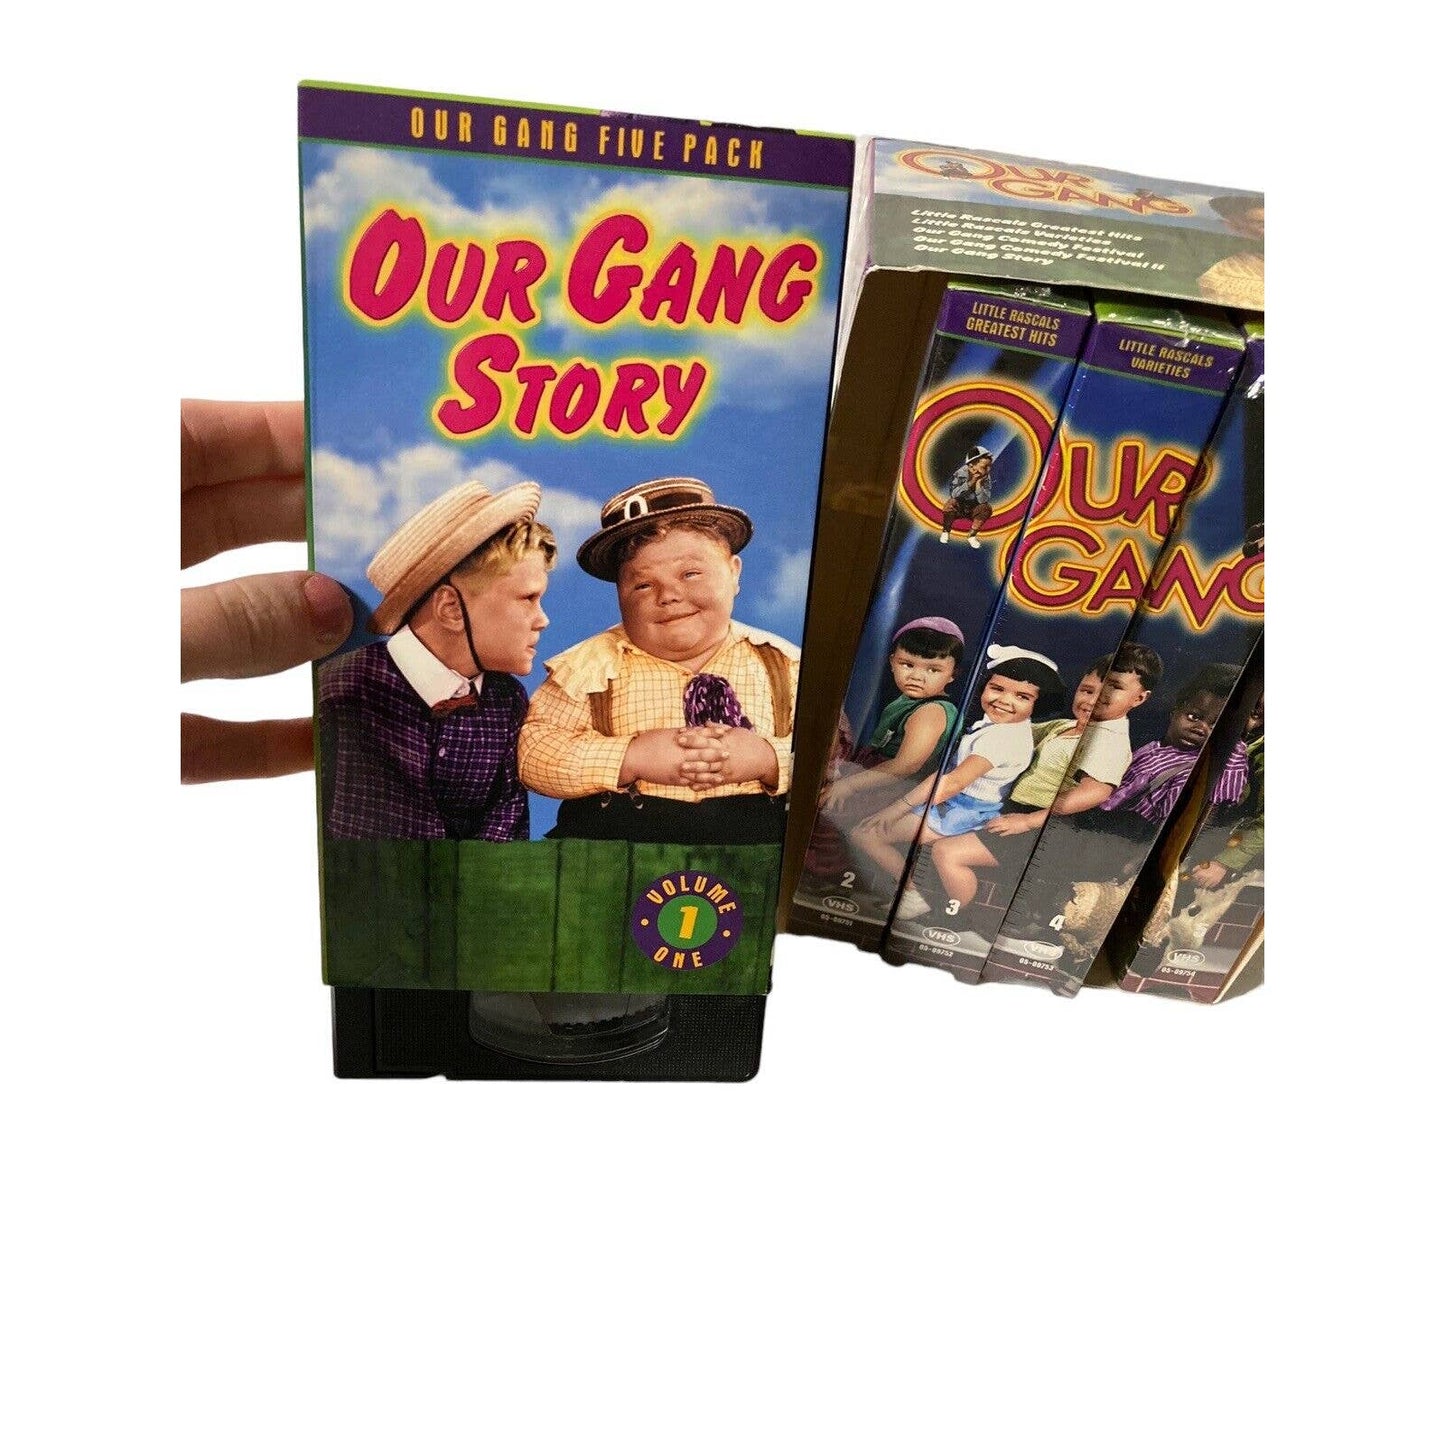 Our Gang - 5 Pack (VHS, 2002, 5-Tape Set) Vintage The Little Rascals